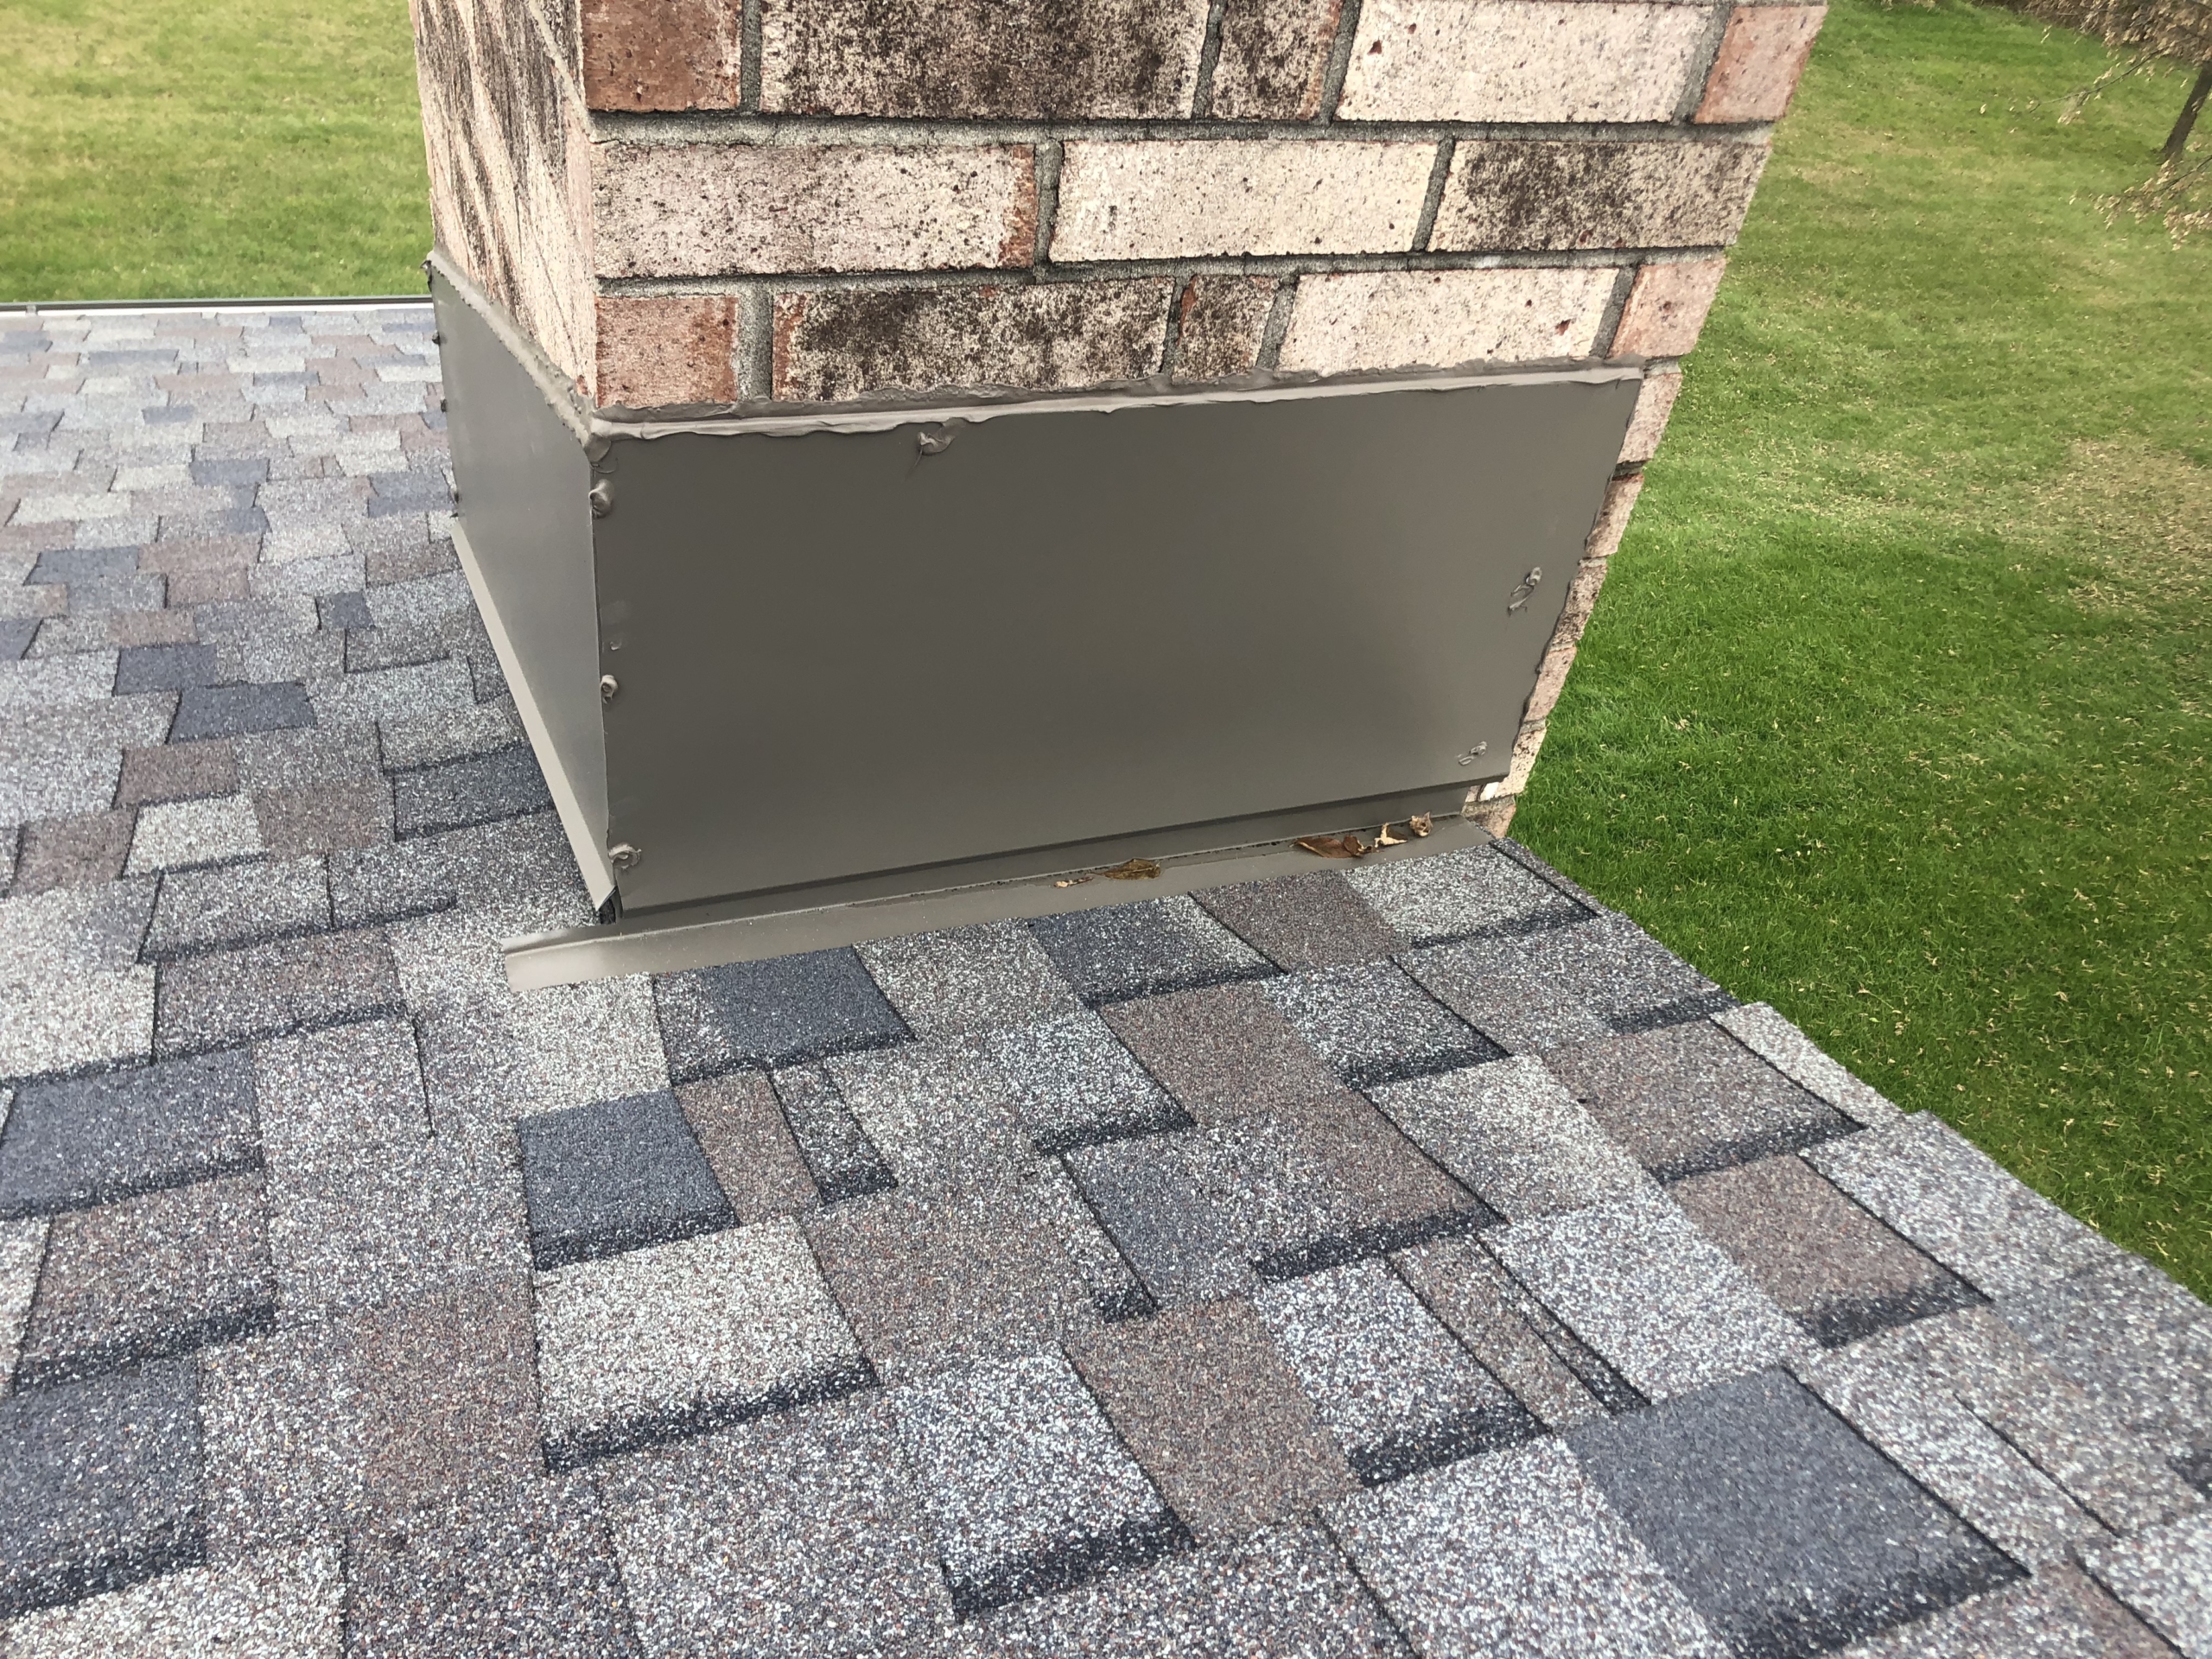 Wisconsin Roofing LLC | Residential | Mequon | Chimney diverter flashing